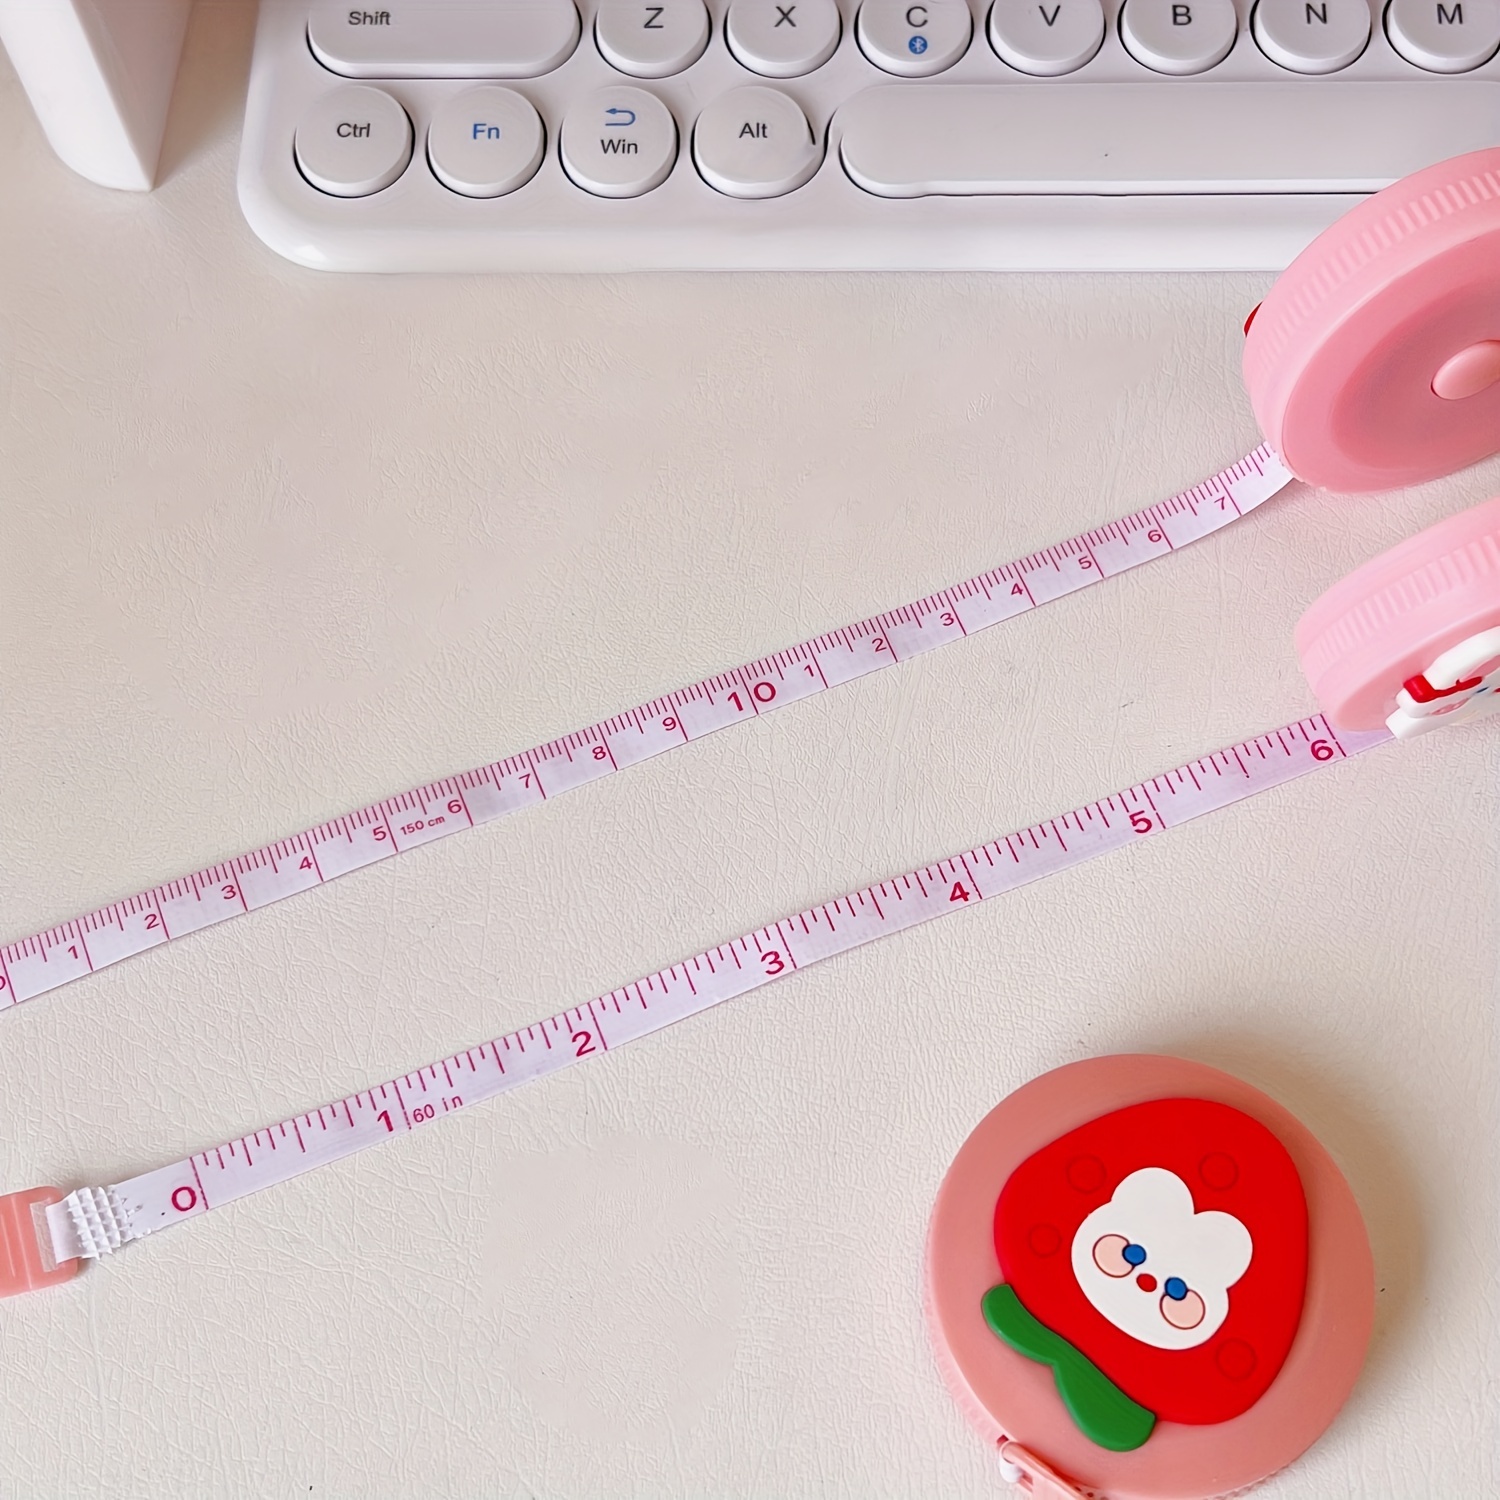 Sewing / Tailors Tape Measure 150cm - PINK : : Home